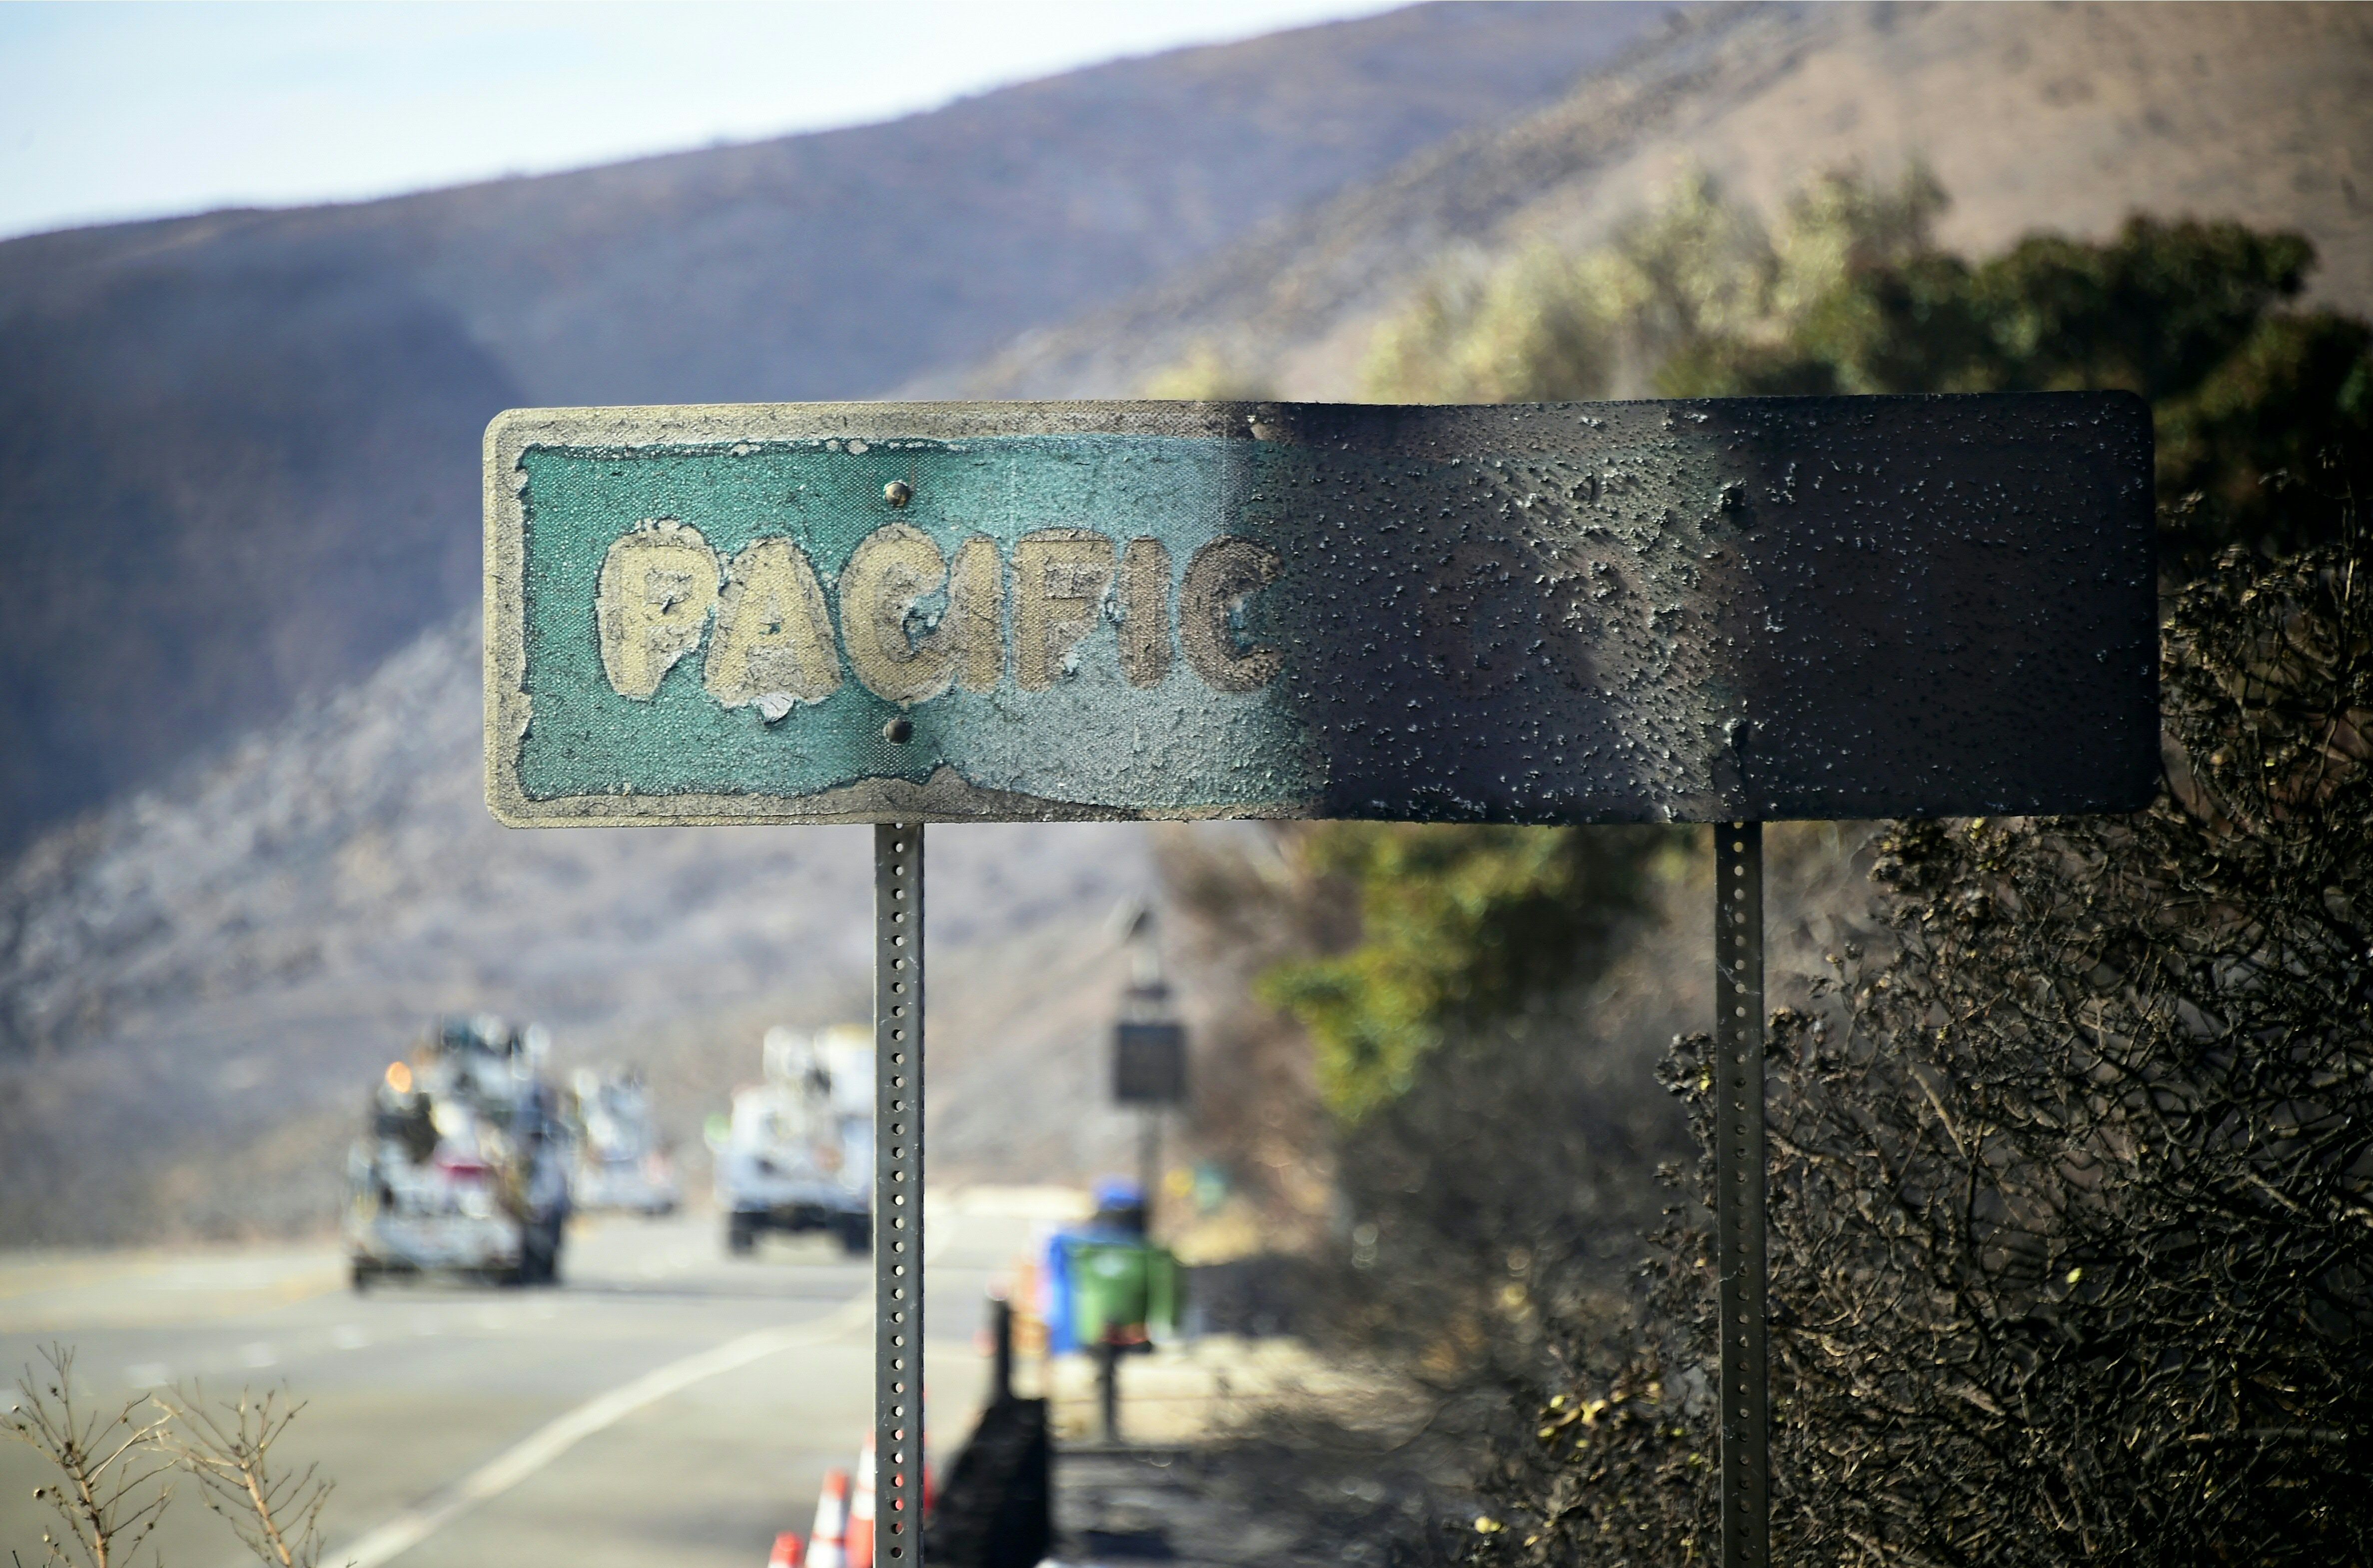 A fire-damaged Pacific Coast sign remains standing along the Pacific Coast Highway amid the blackened and charred hills from the Woolsey Fire in Malibu, California on November 15, 2018. - Much of the area remain under evacuation one week after the Woolsey Fire started. (Photo by Frederic J. BROWN / AFP) (Photo credit should read FREDERIC J. BROWN/AFP via Getty Images)